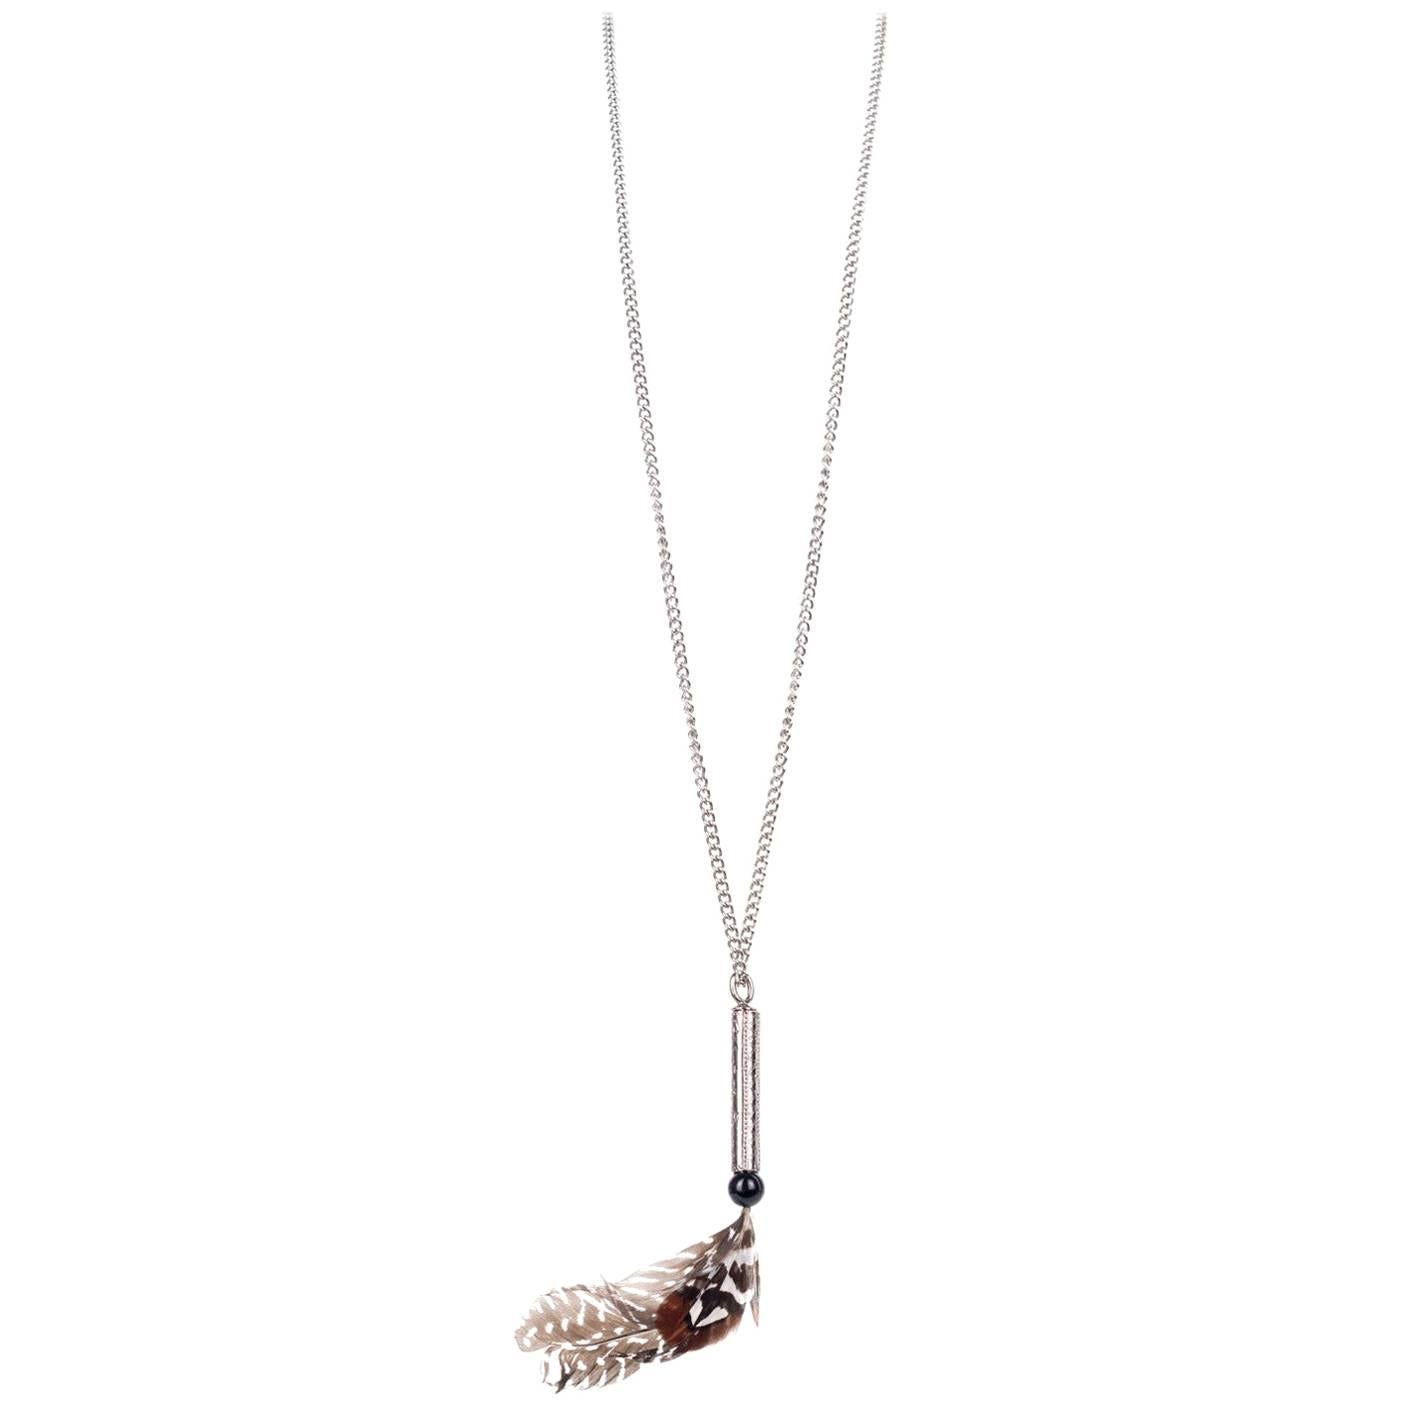 Roberto Cavalli Silver Plated Urban Feather Long Chain Necklace For Sale